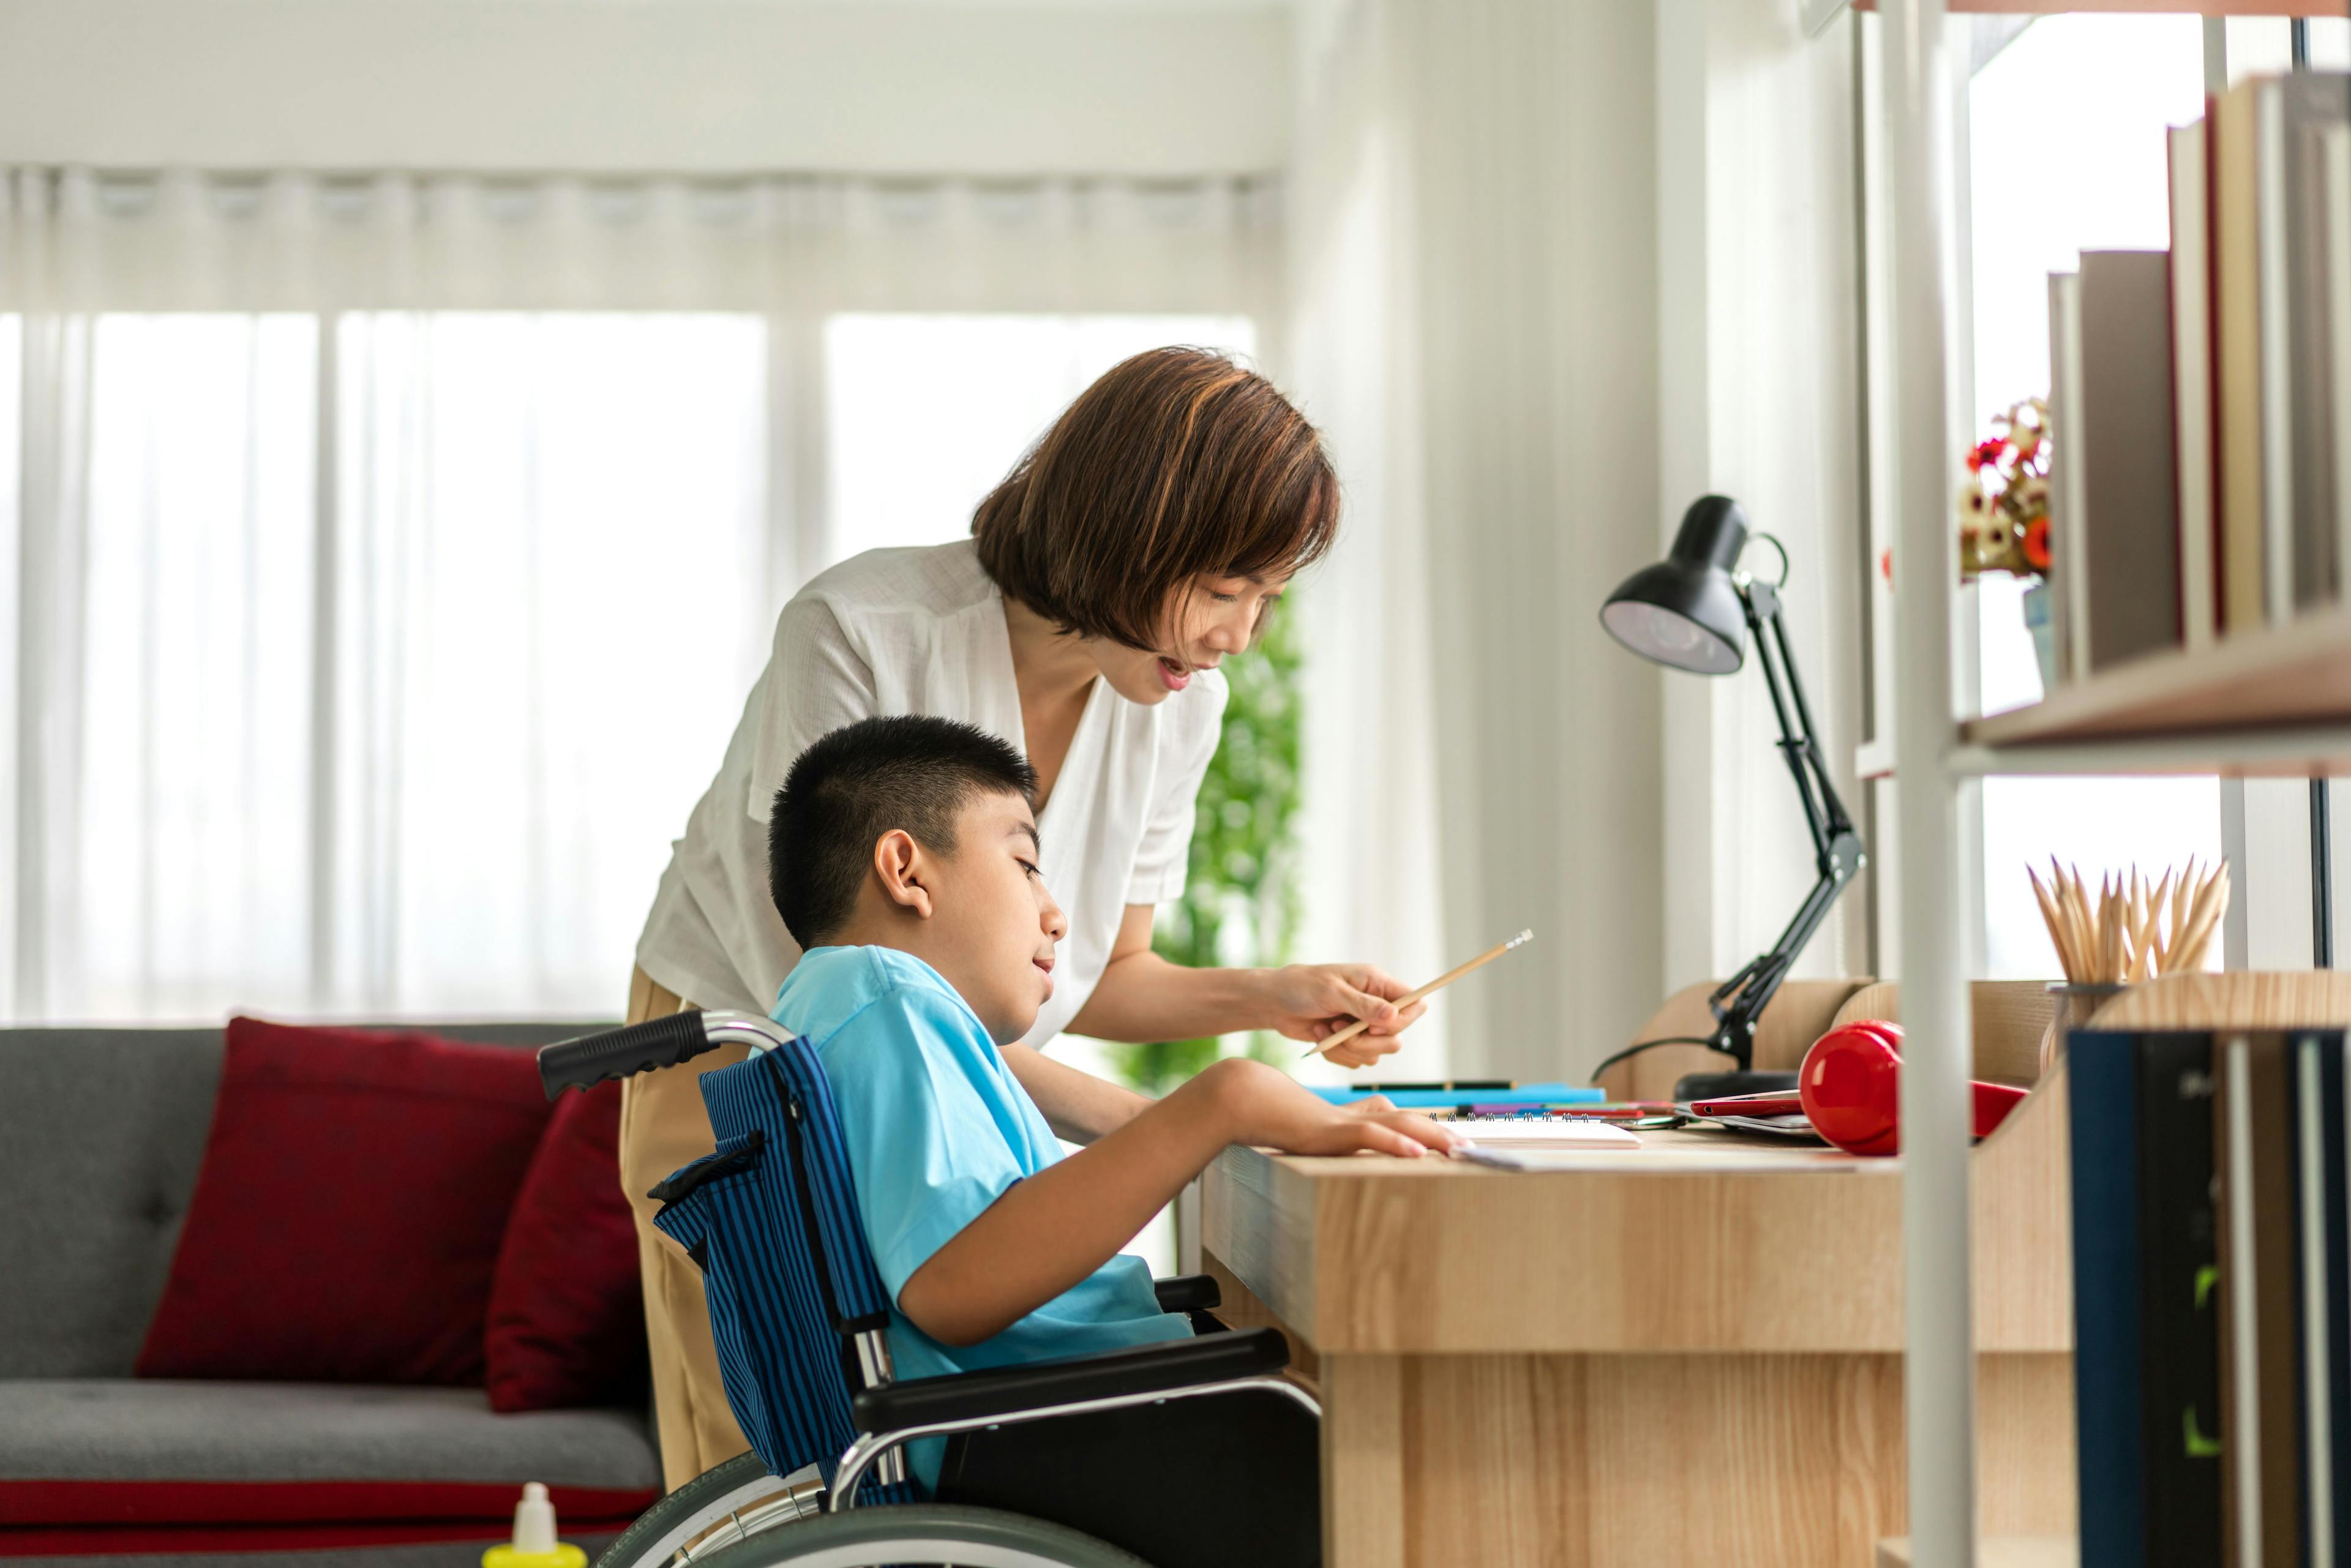 child in wheelchair and parent | Image credit: Art_Photo - stock.adobe.com